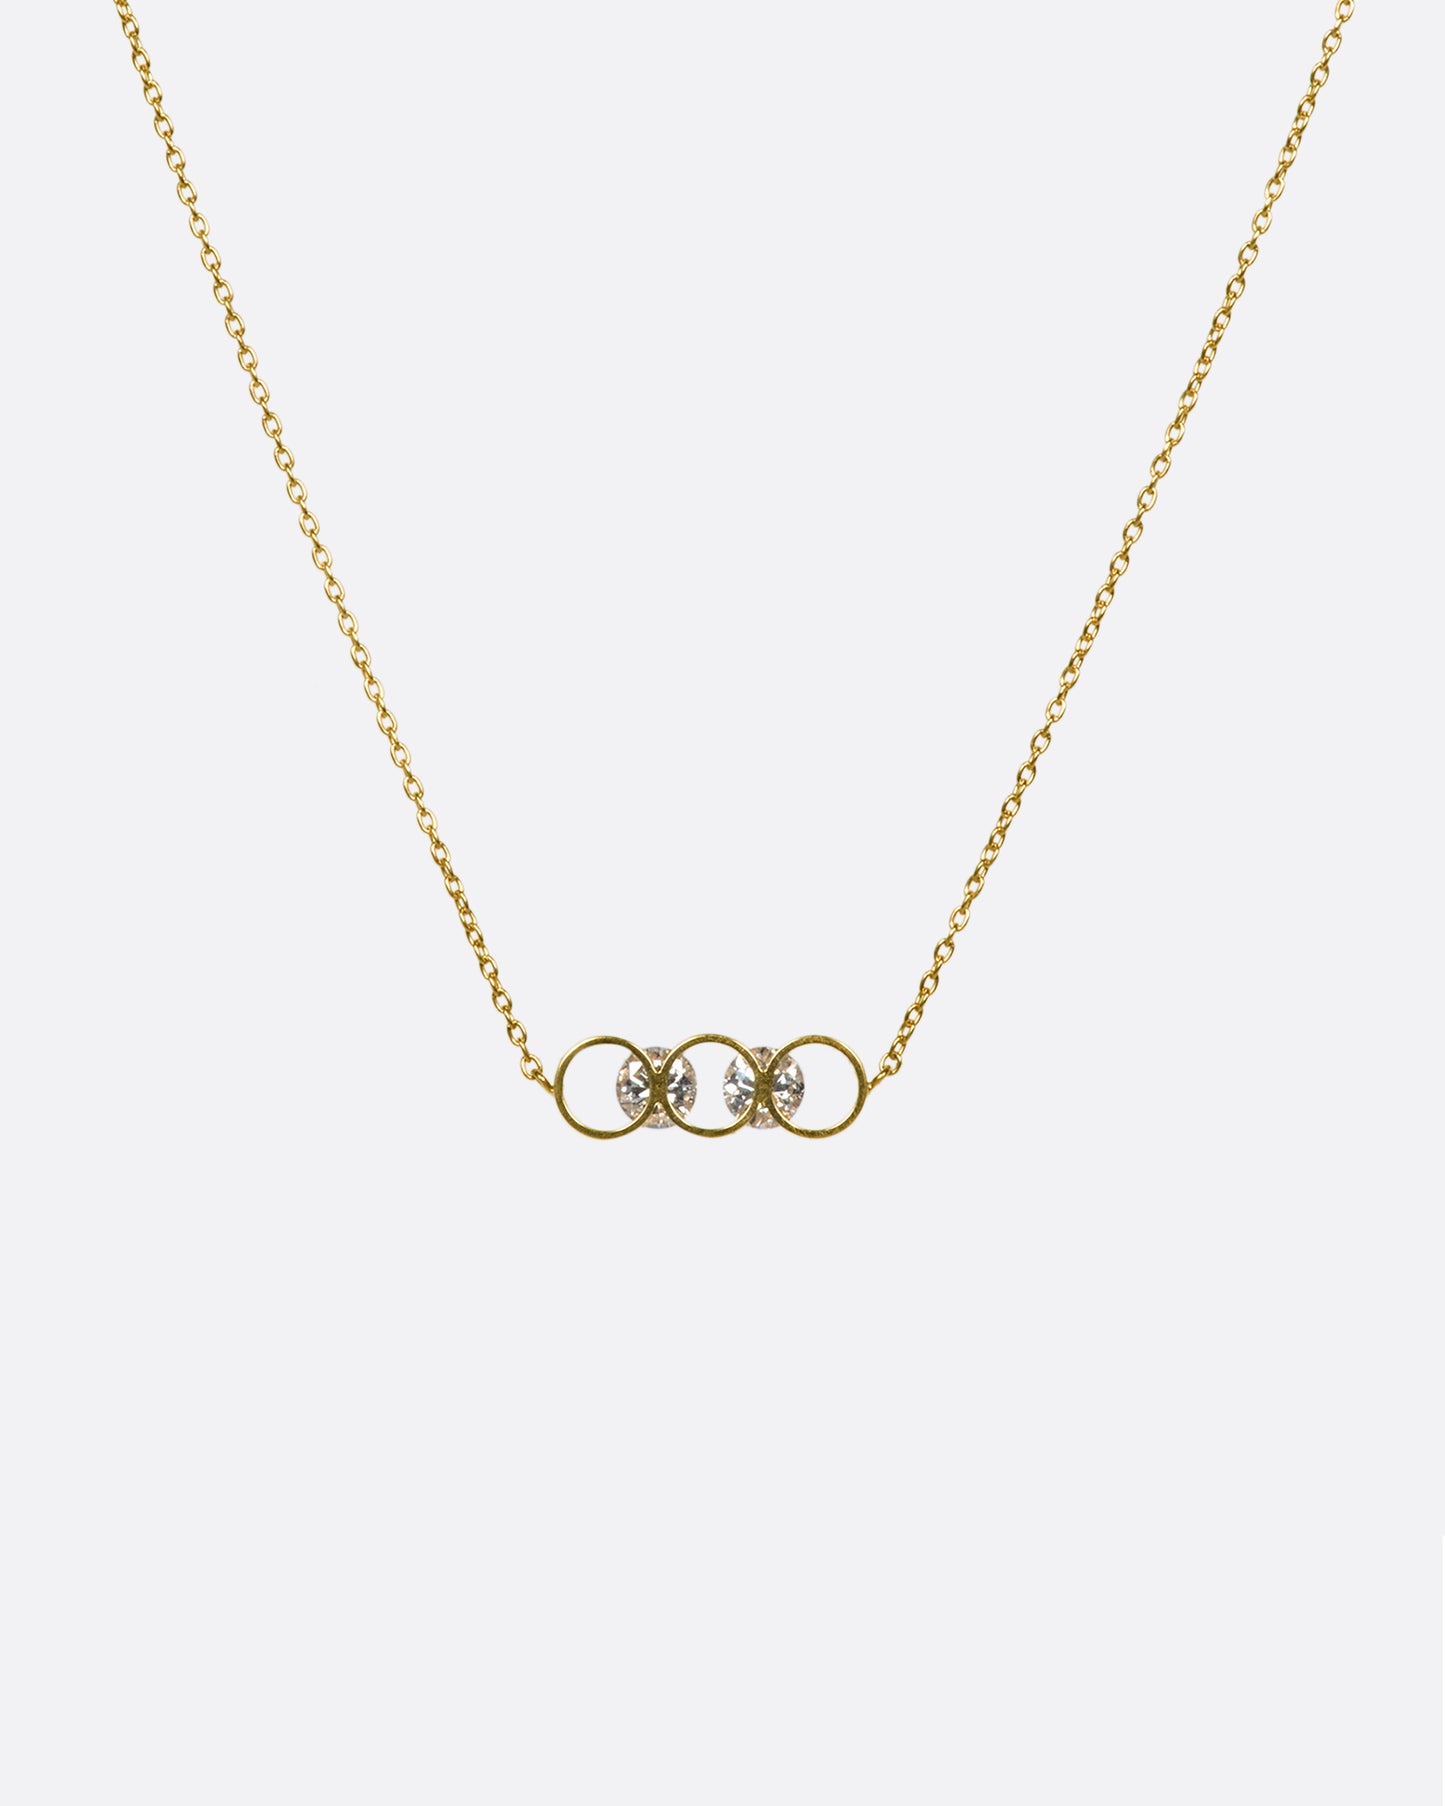 A gold necklace with two diamonds set into circular settings, from far away.